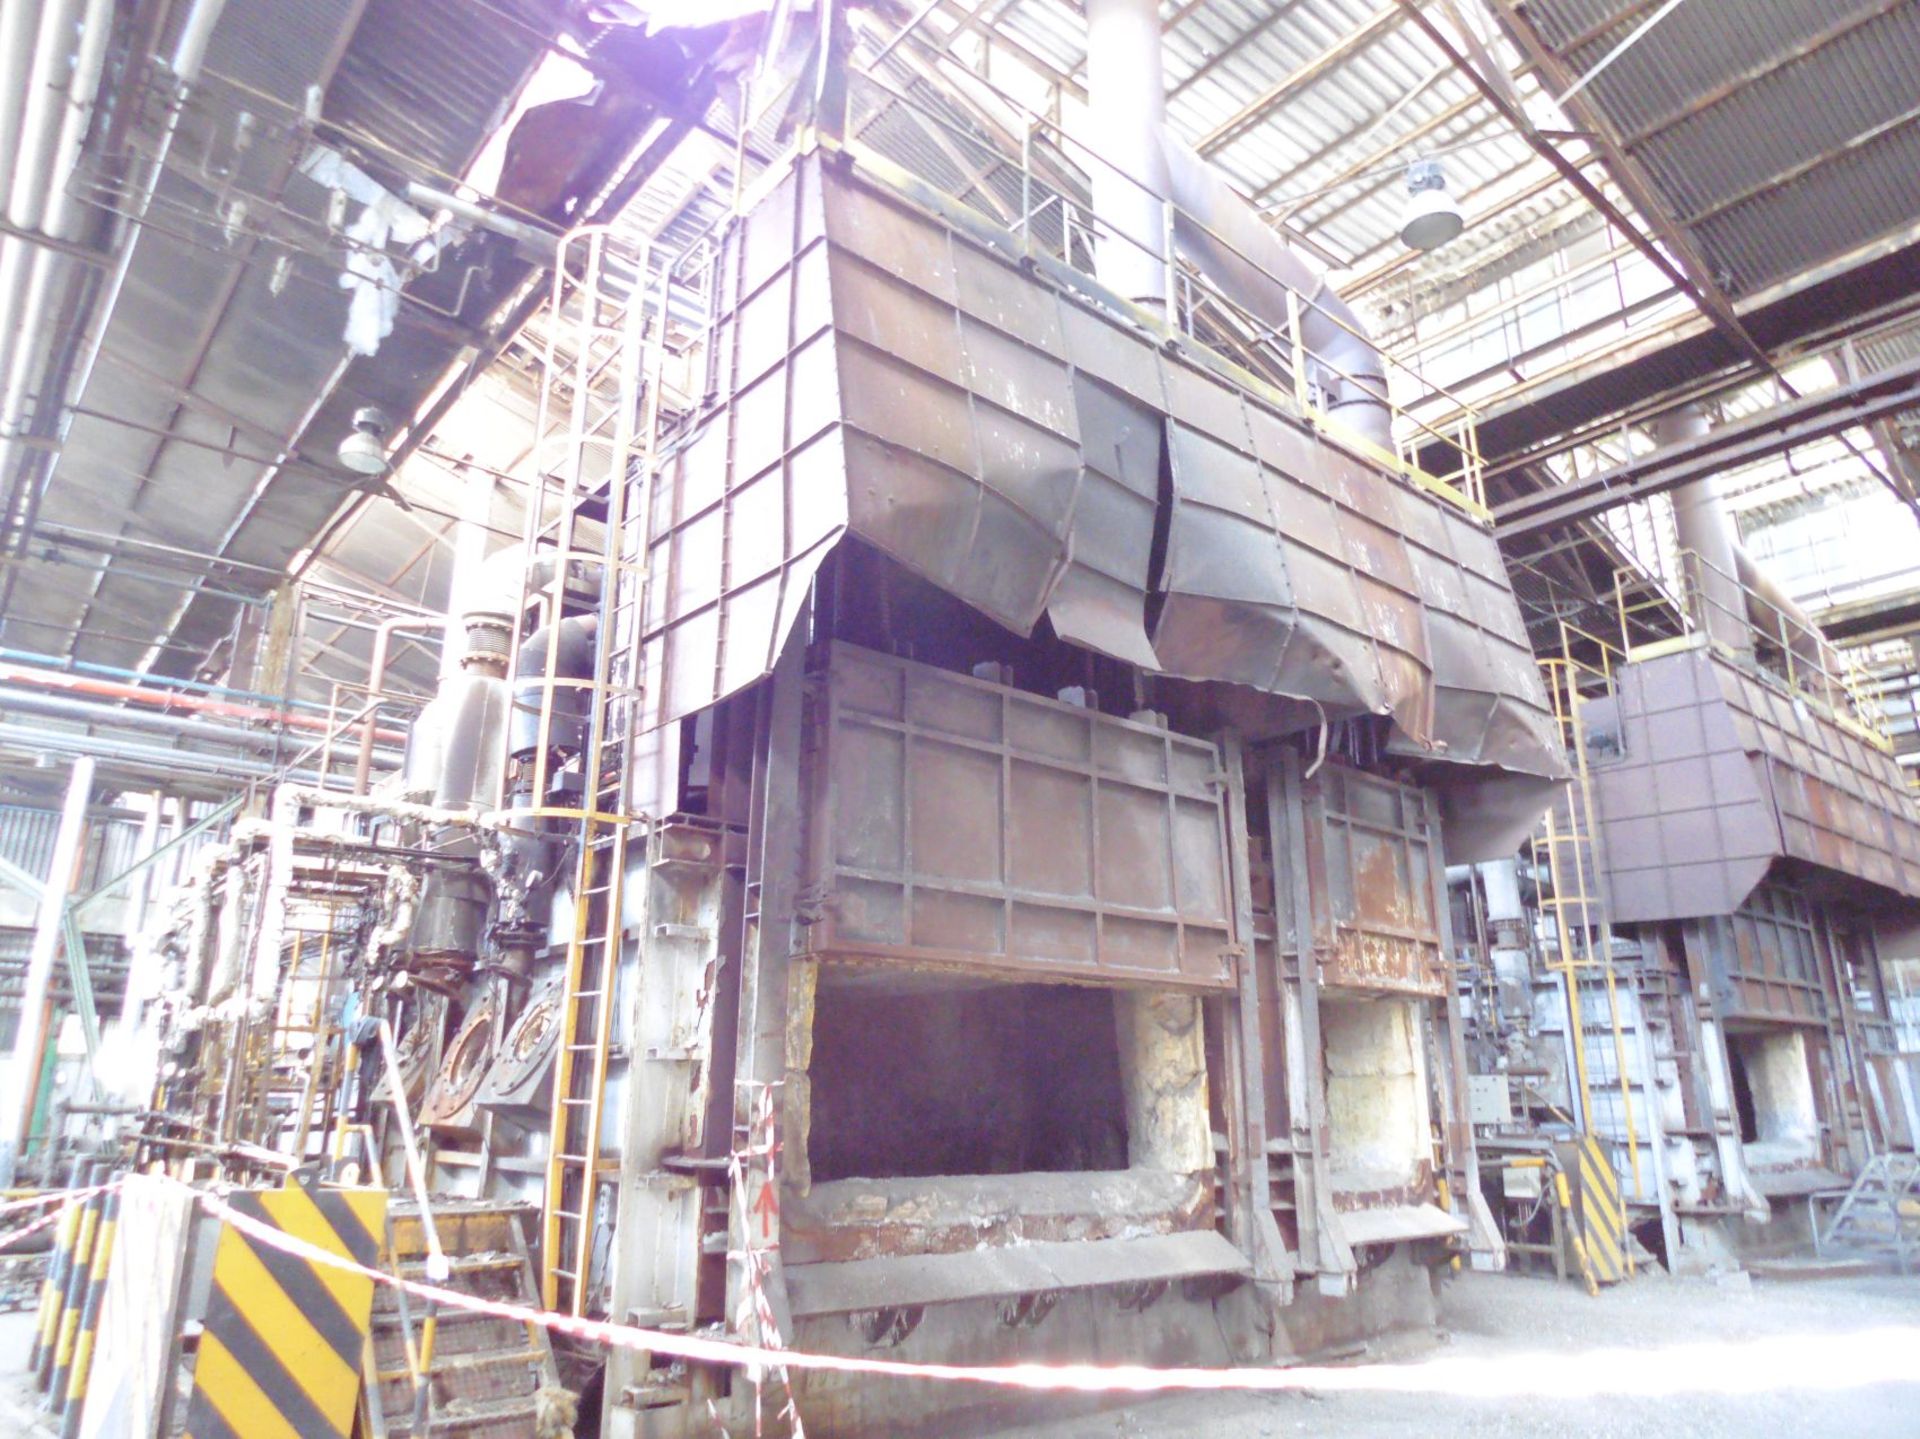 35 Ton and 30 Ton Aluminium Melting Furnaces; both with Low Sulphur Oil Burner Combustion Systems - Image 2 of 6